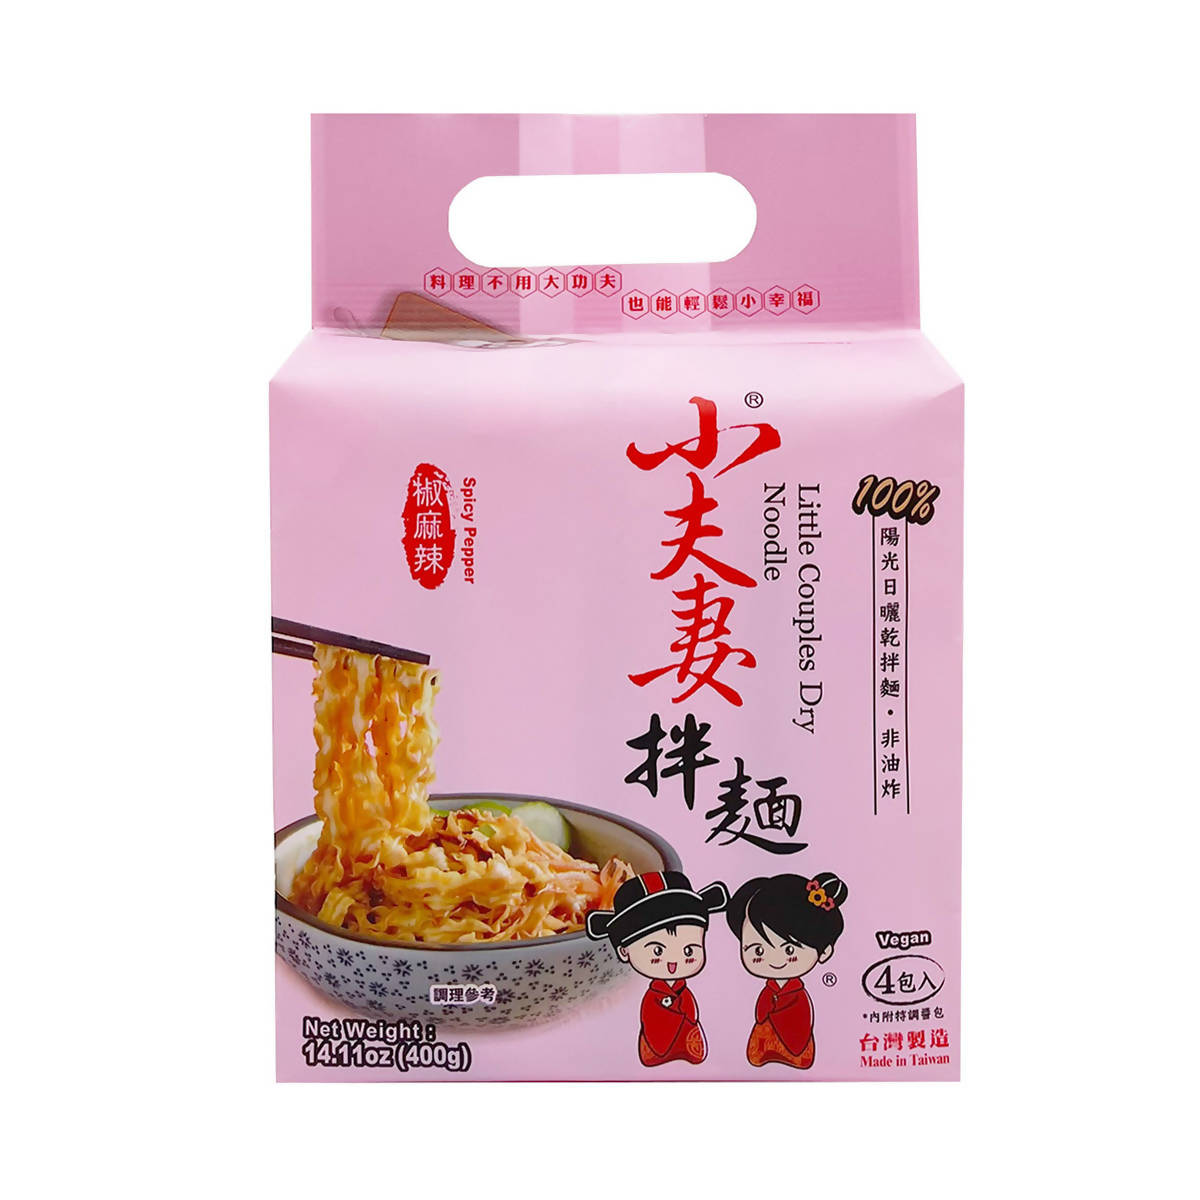 Taiwan Direct Mail【Little Couple】LITTLE COUPLES Chili and Spicy Dry Noodles (Vegetarian) 400g 4pcs 